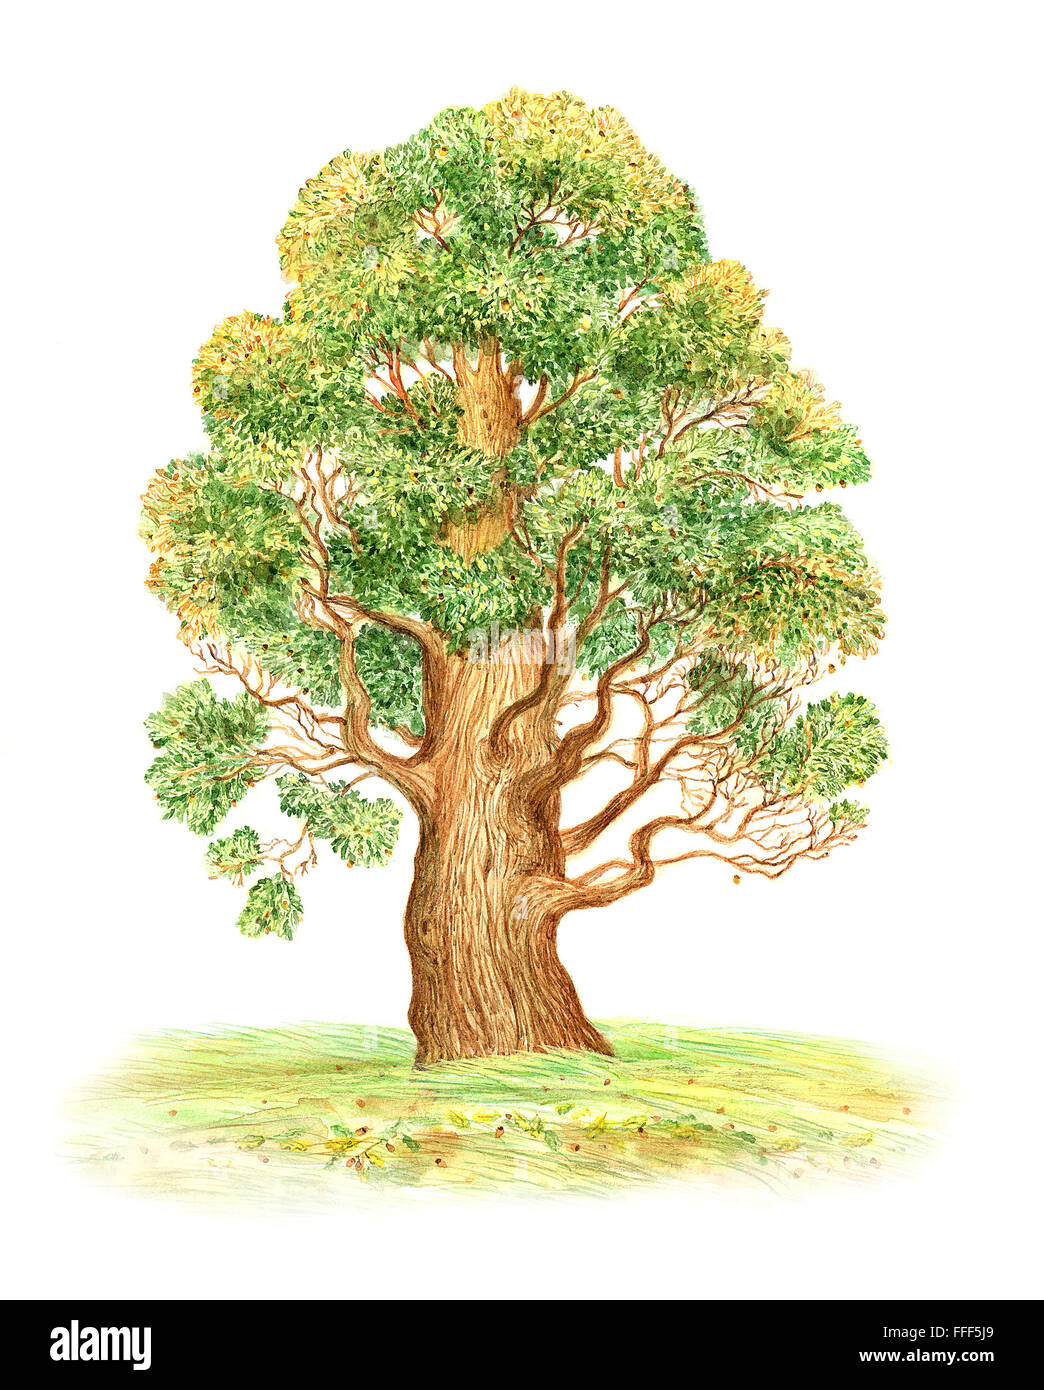 Beautiful Watercolor Painting Of A Large Oak Tree On A White Background Stock Photo - Alamy